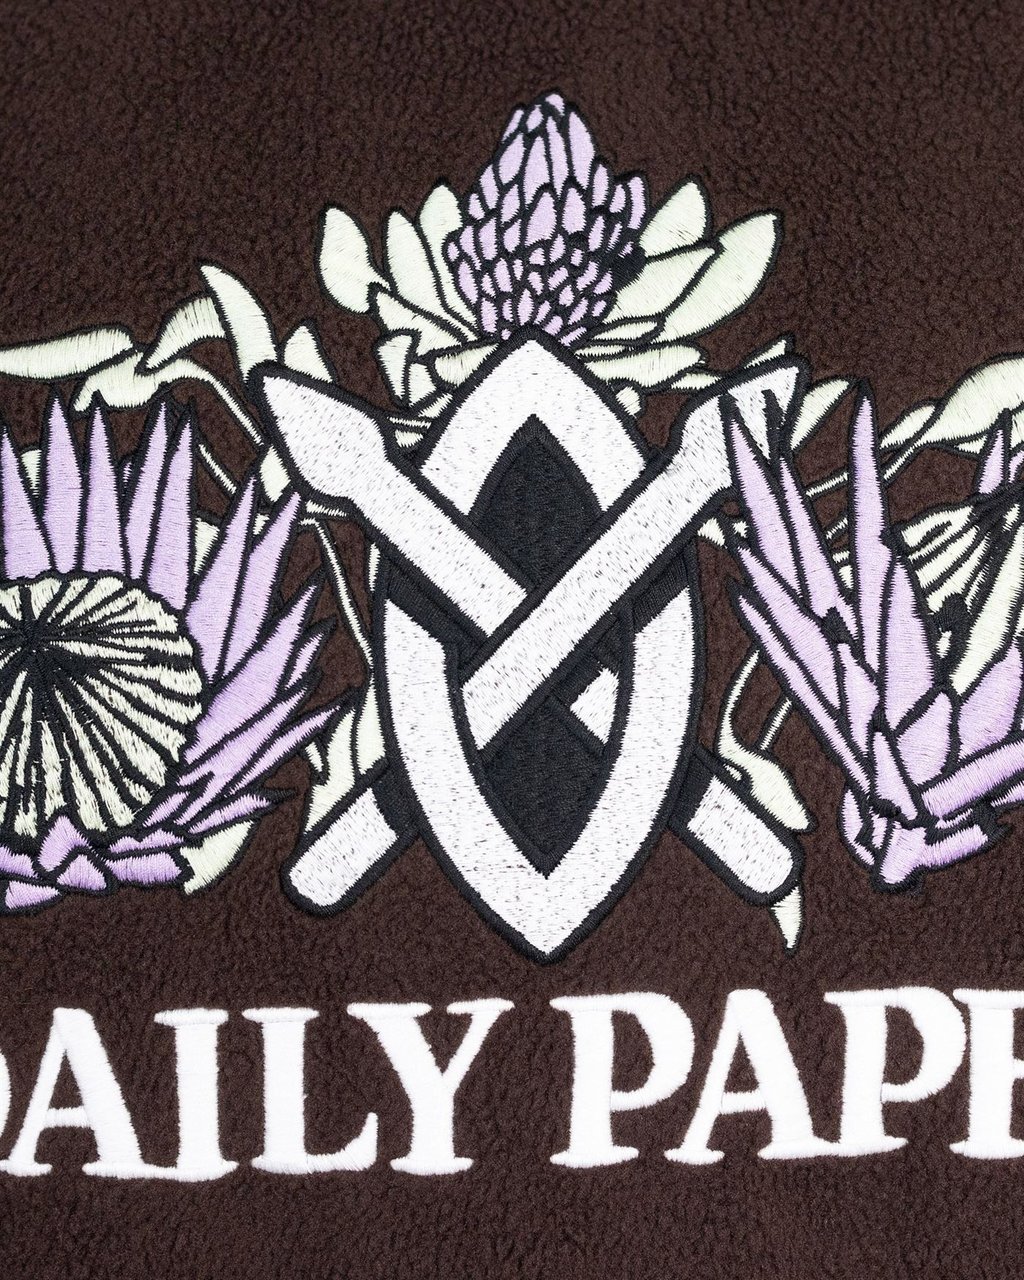 Daily Paper Daily Paper Uomo Sweaters Brown Bruin